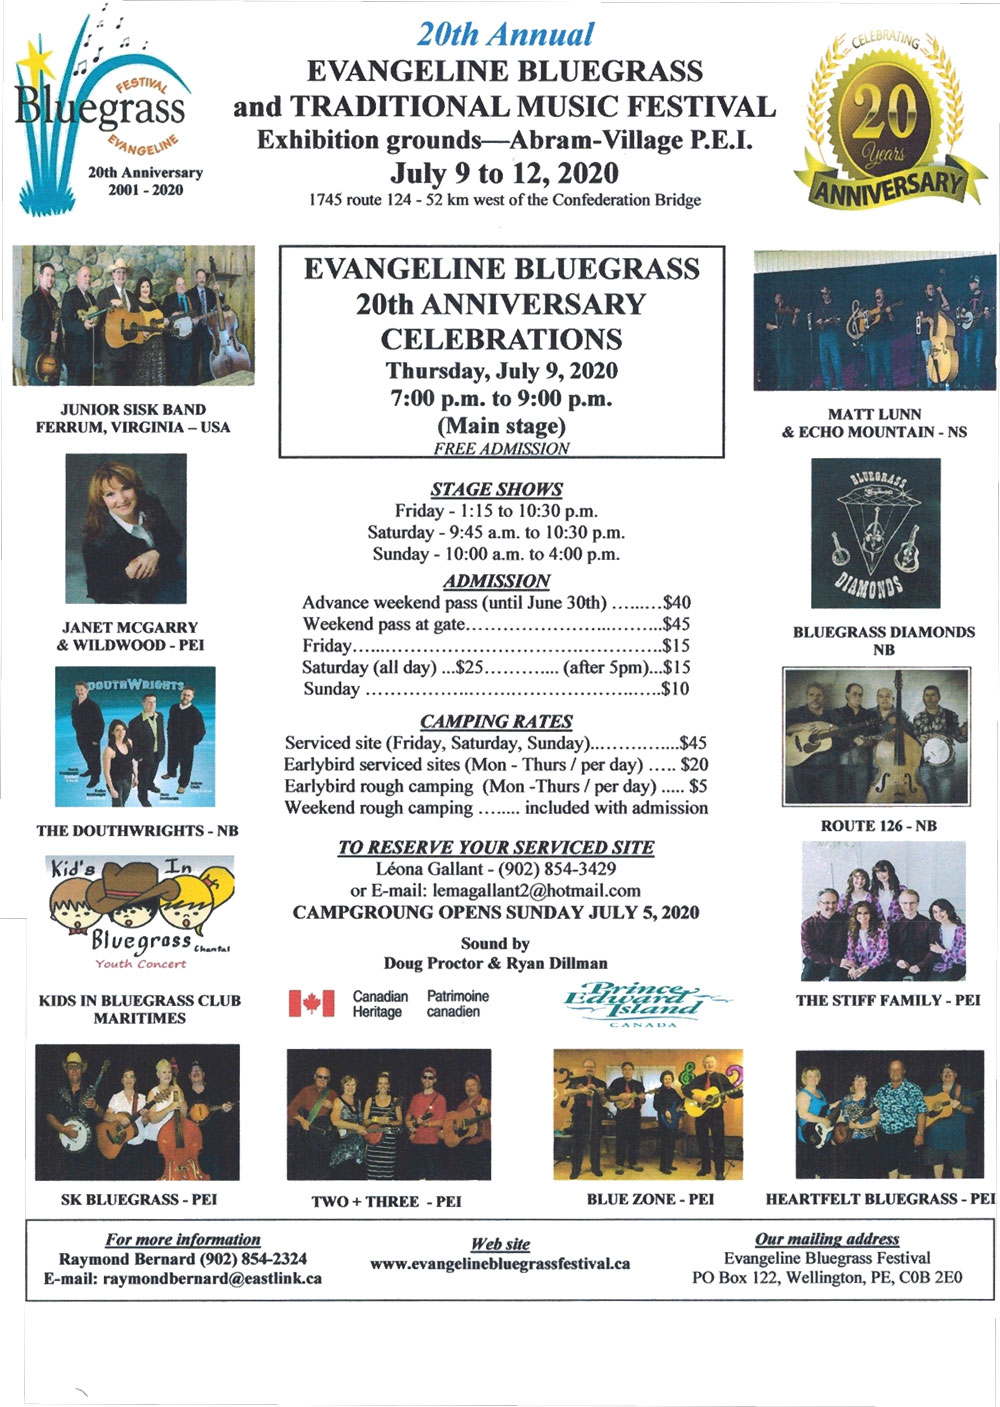 Evangeline Bluegrass and Traditional Music Festival